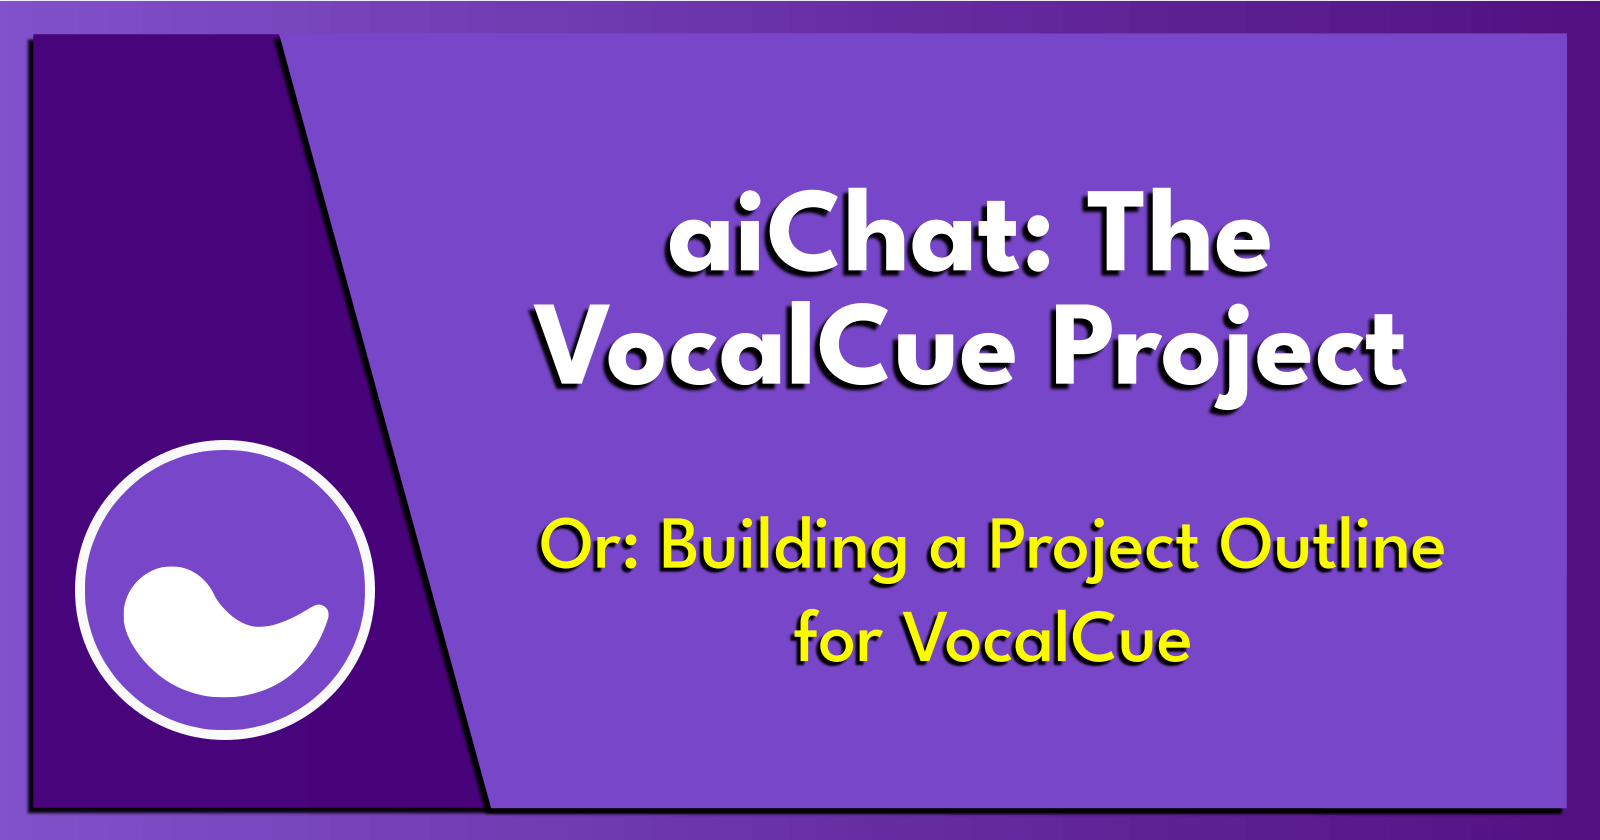 aiChat: The VocalCue Project.